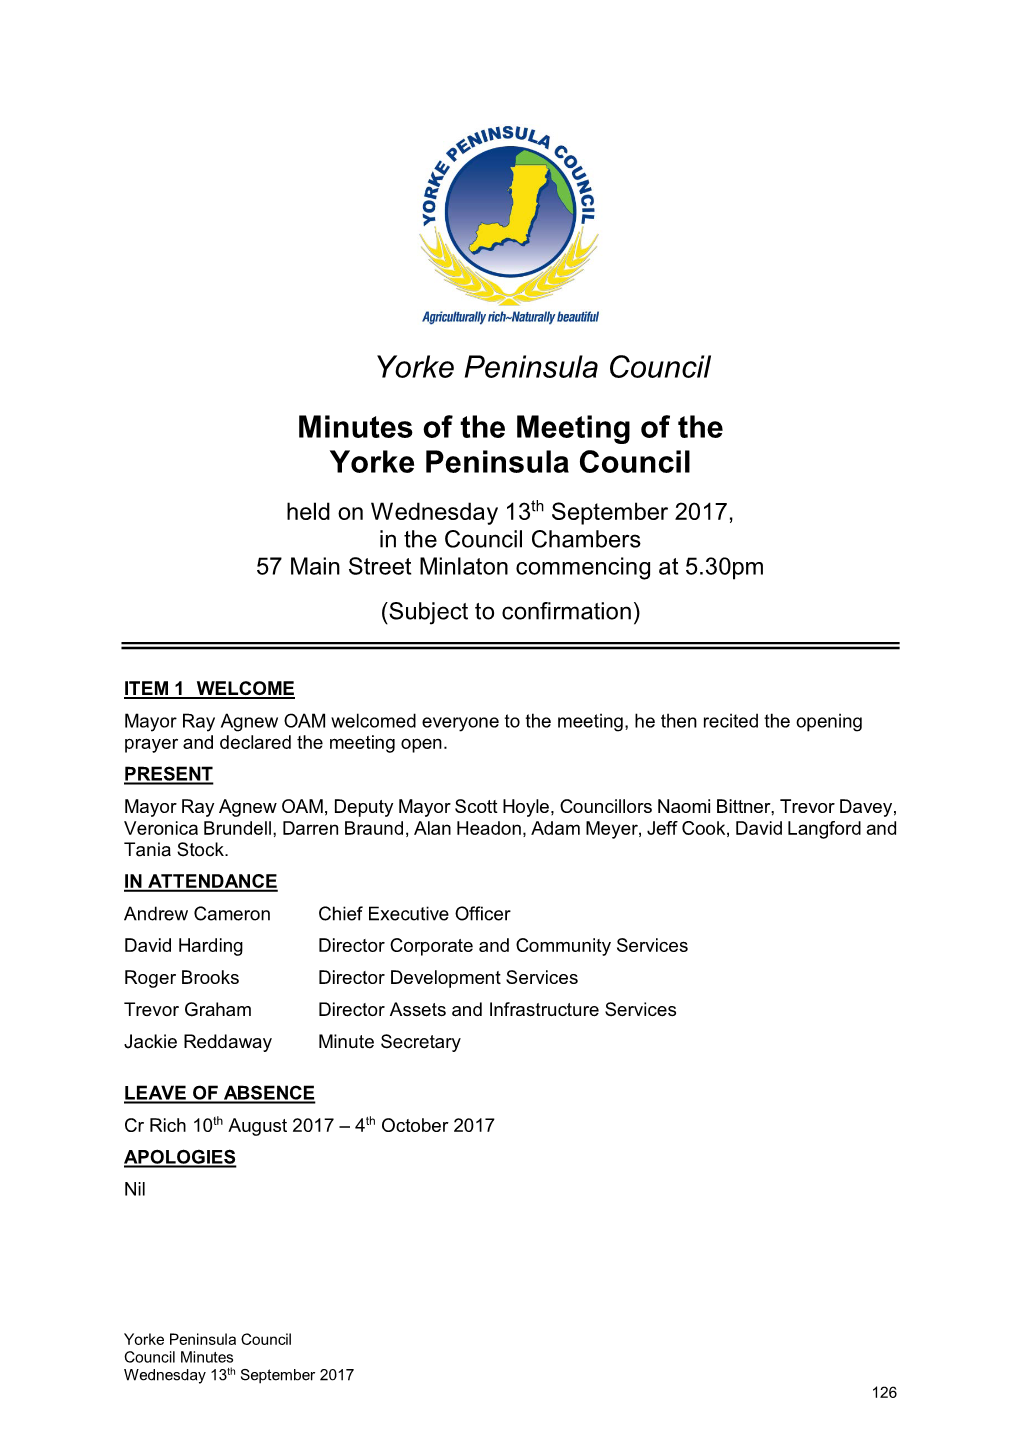 Yorke Peninsula Council Minutes of the Meeting of the Yorke Peninsula Council